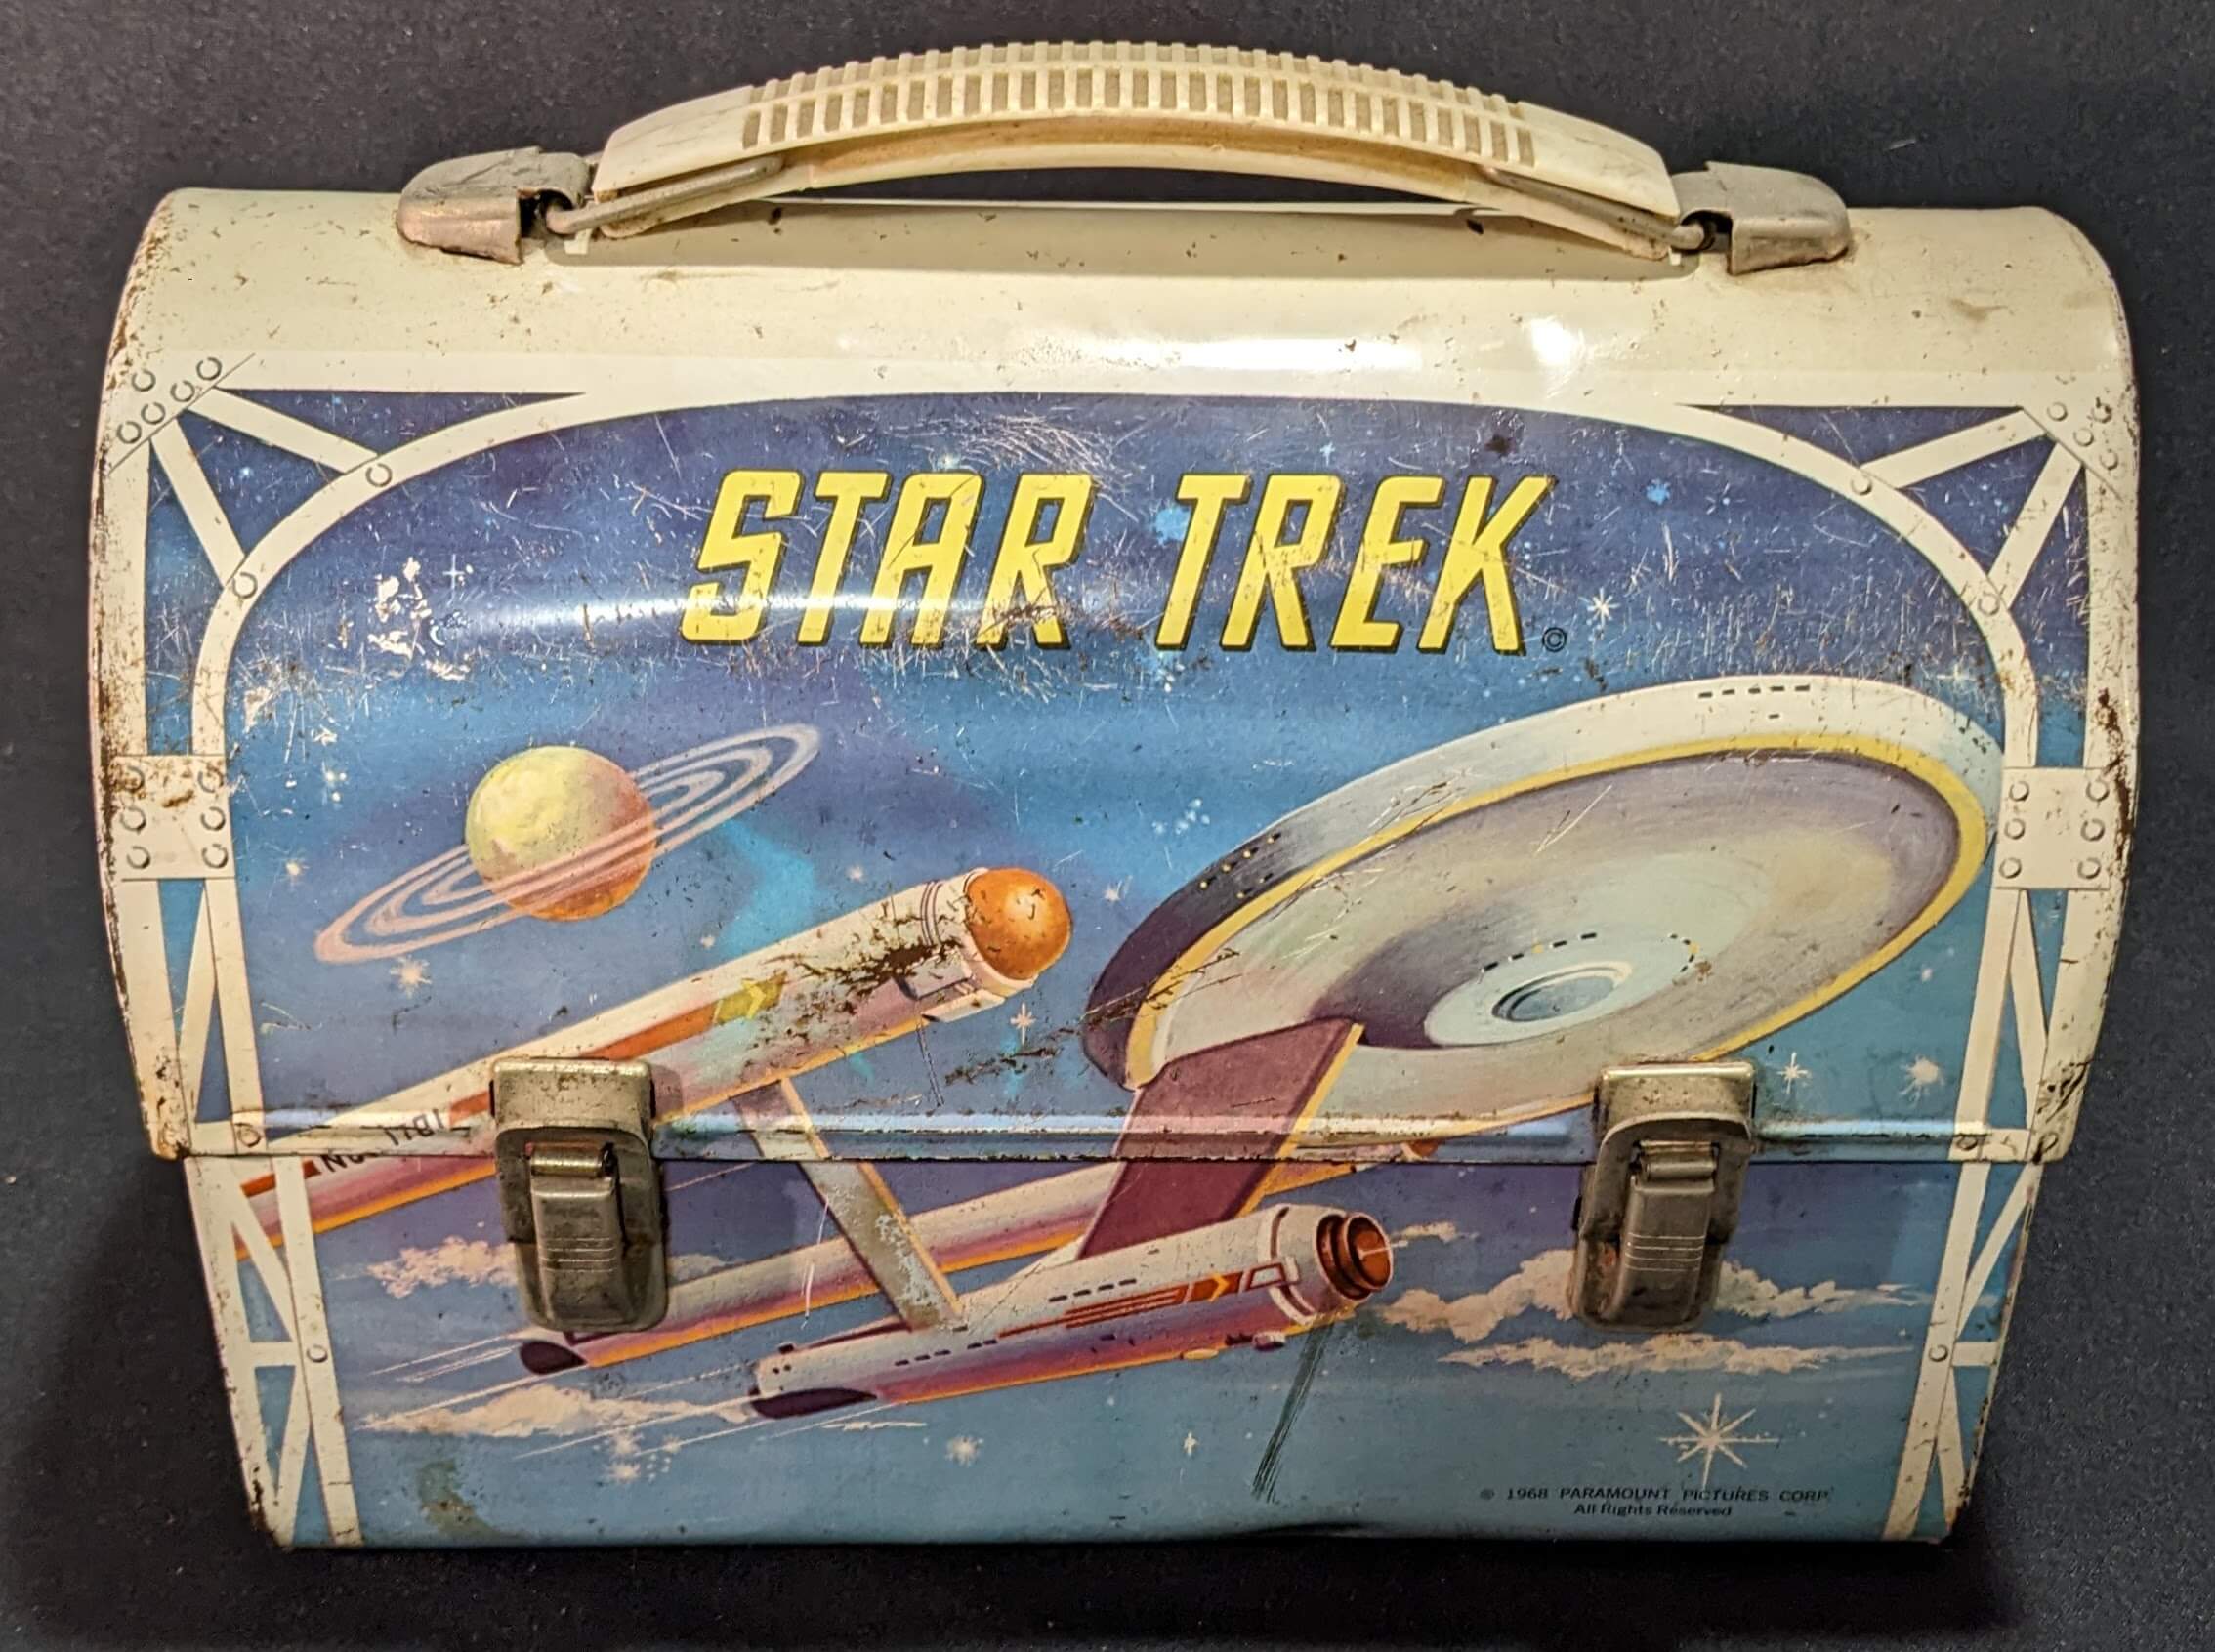 Star Trek™ Gear-Up Glow-in-the-Dark Cold Pack Lunch Box